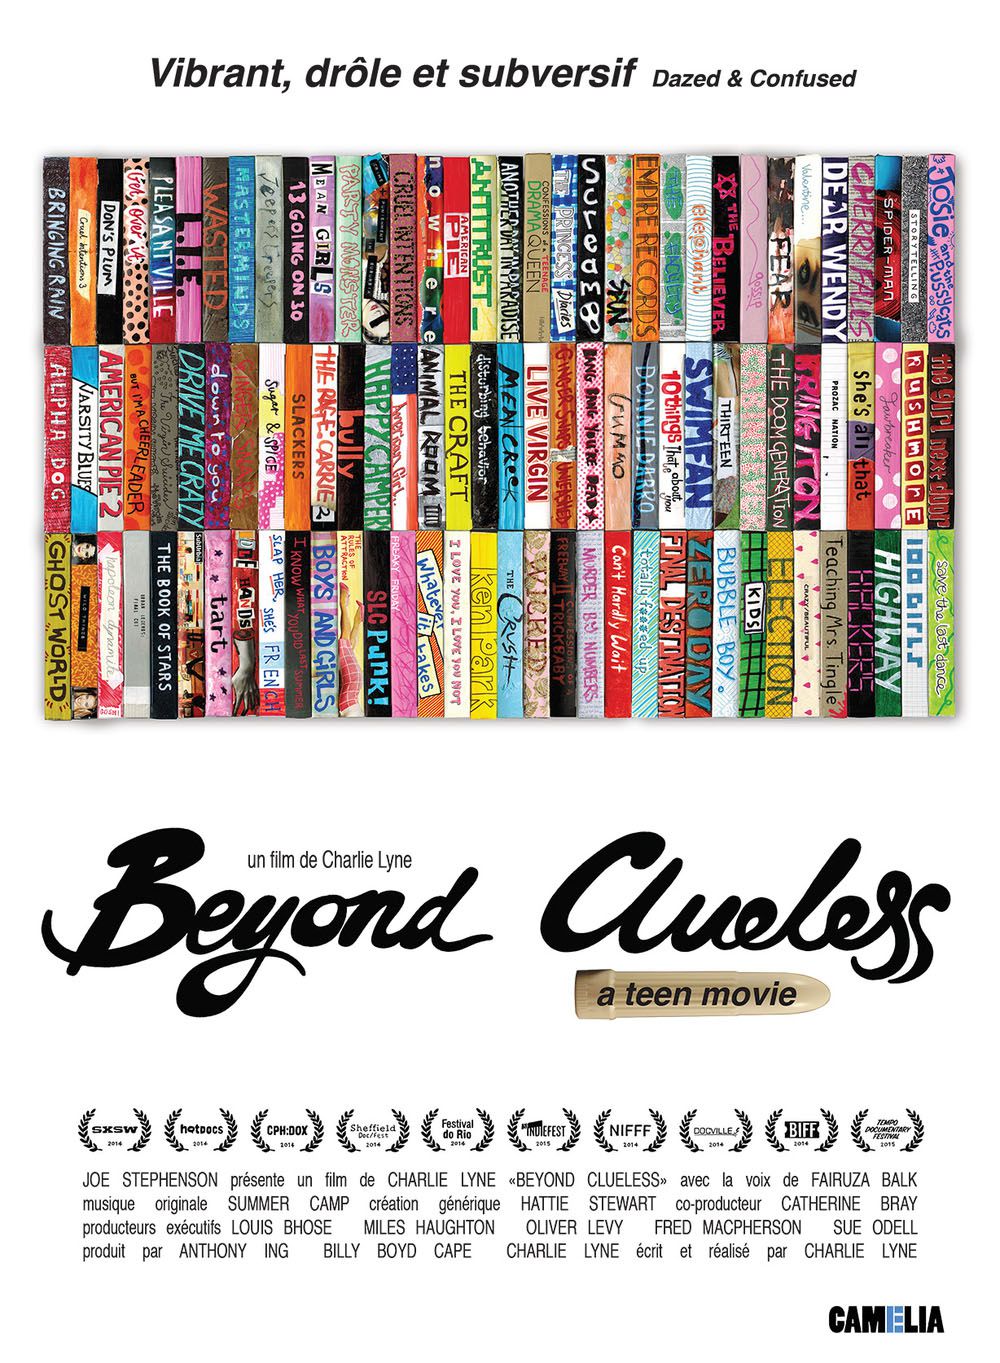 Beyond Clueless - Documentaire (2015)